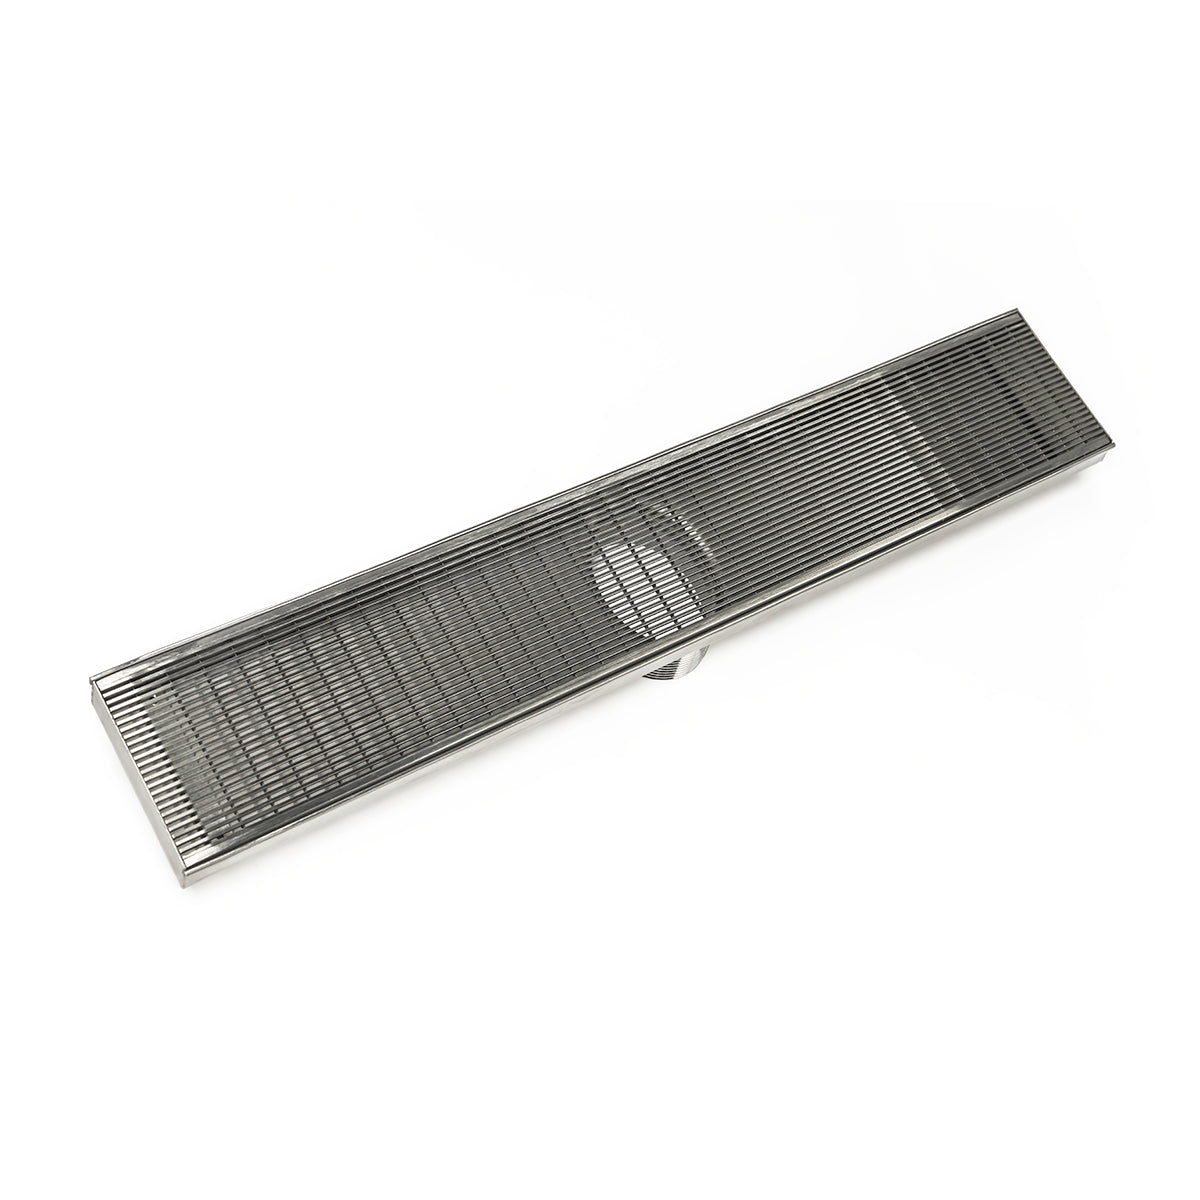 Infinity Drain 42" FX Series High Flow Fixed Length Linear Drain Kit with Wedge Wire Grate with ABS Drain Body